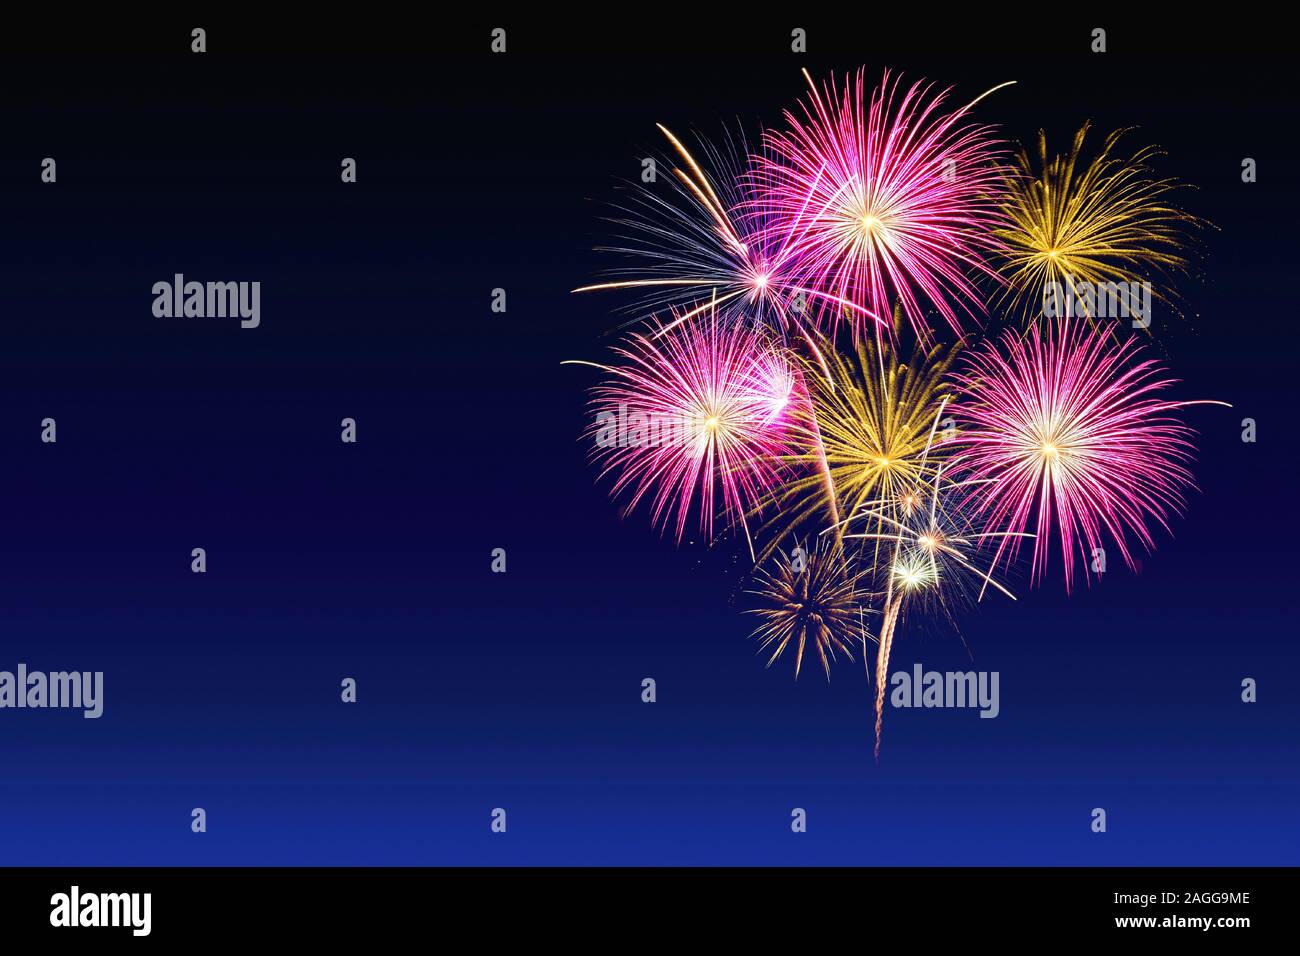 Colorful fireworks celebration and the twlight sky background. Stock Photo